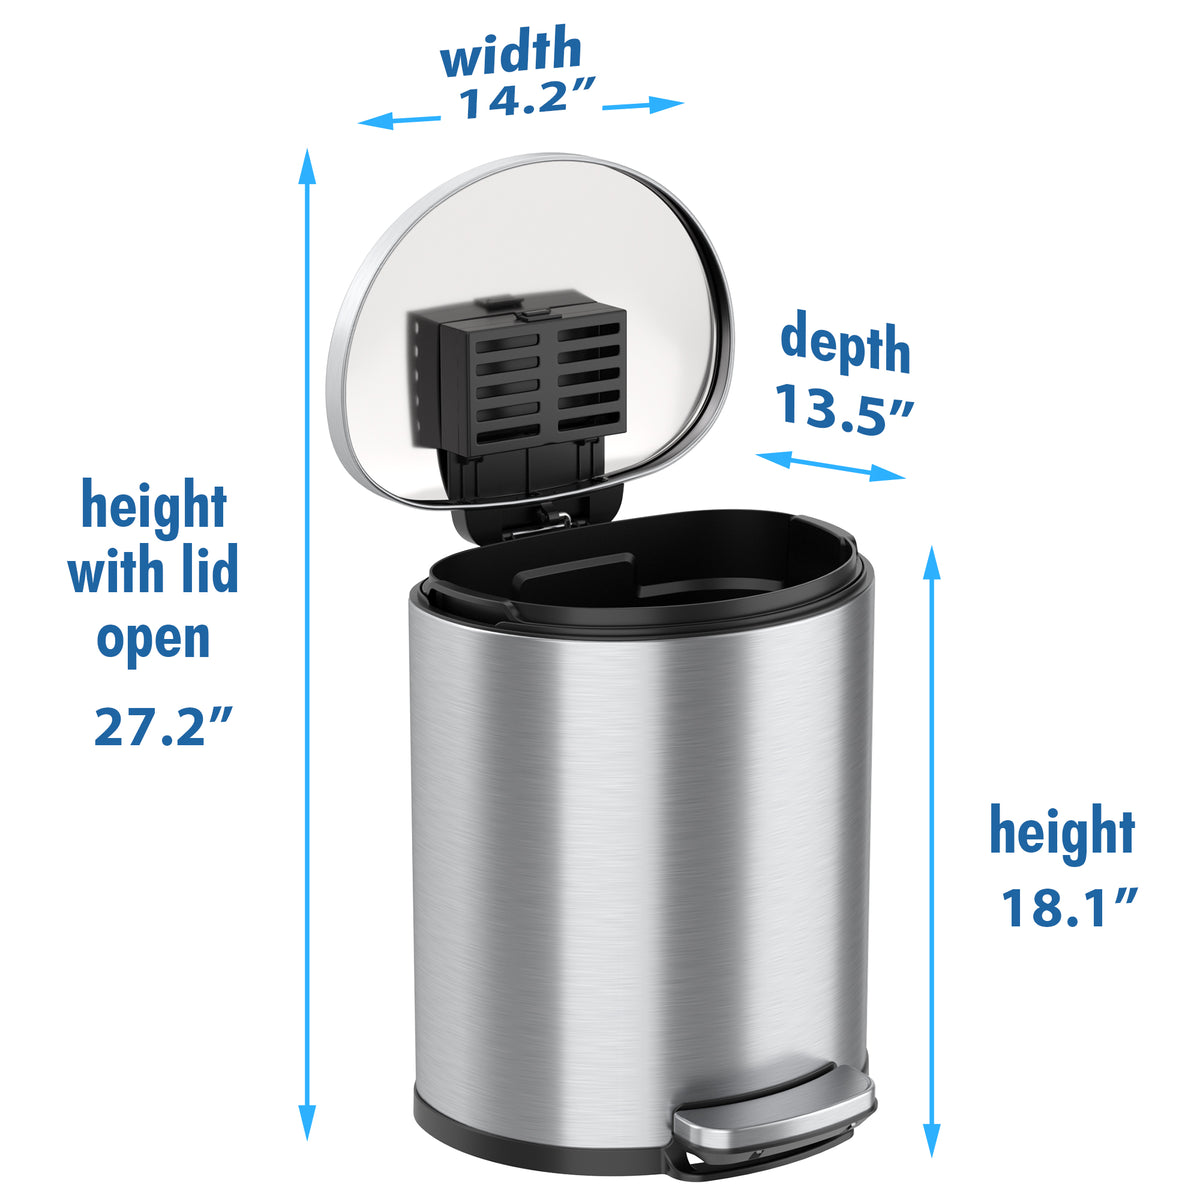 5 Gallon / 19 Liter SoftStep Semi-Round Step Pedal Trash Can